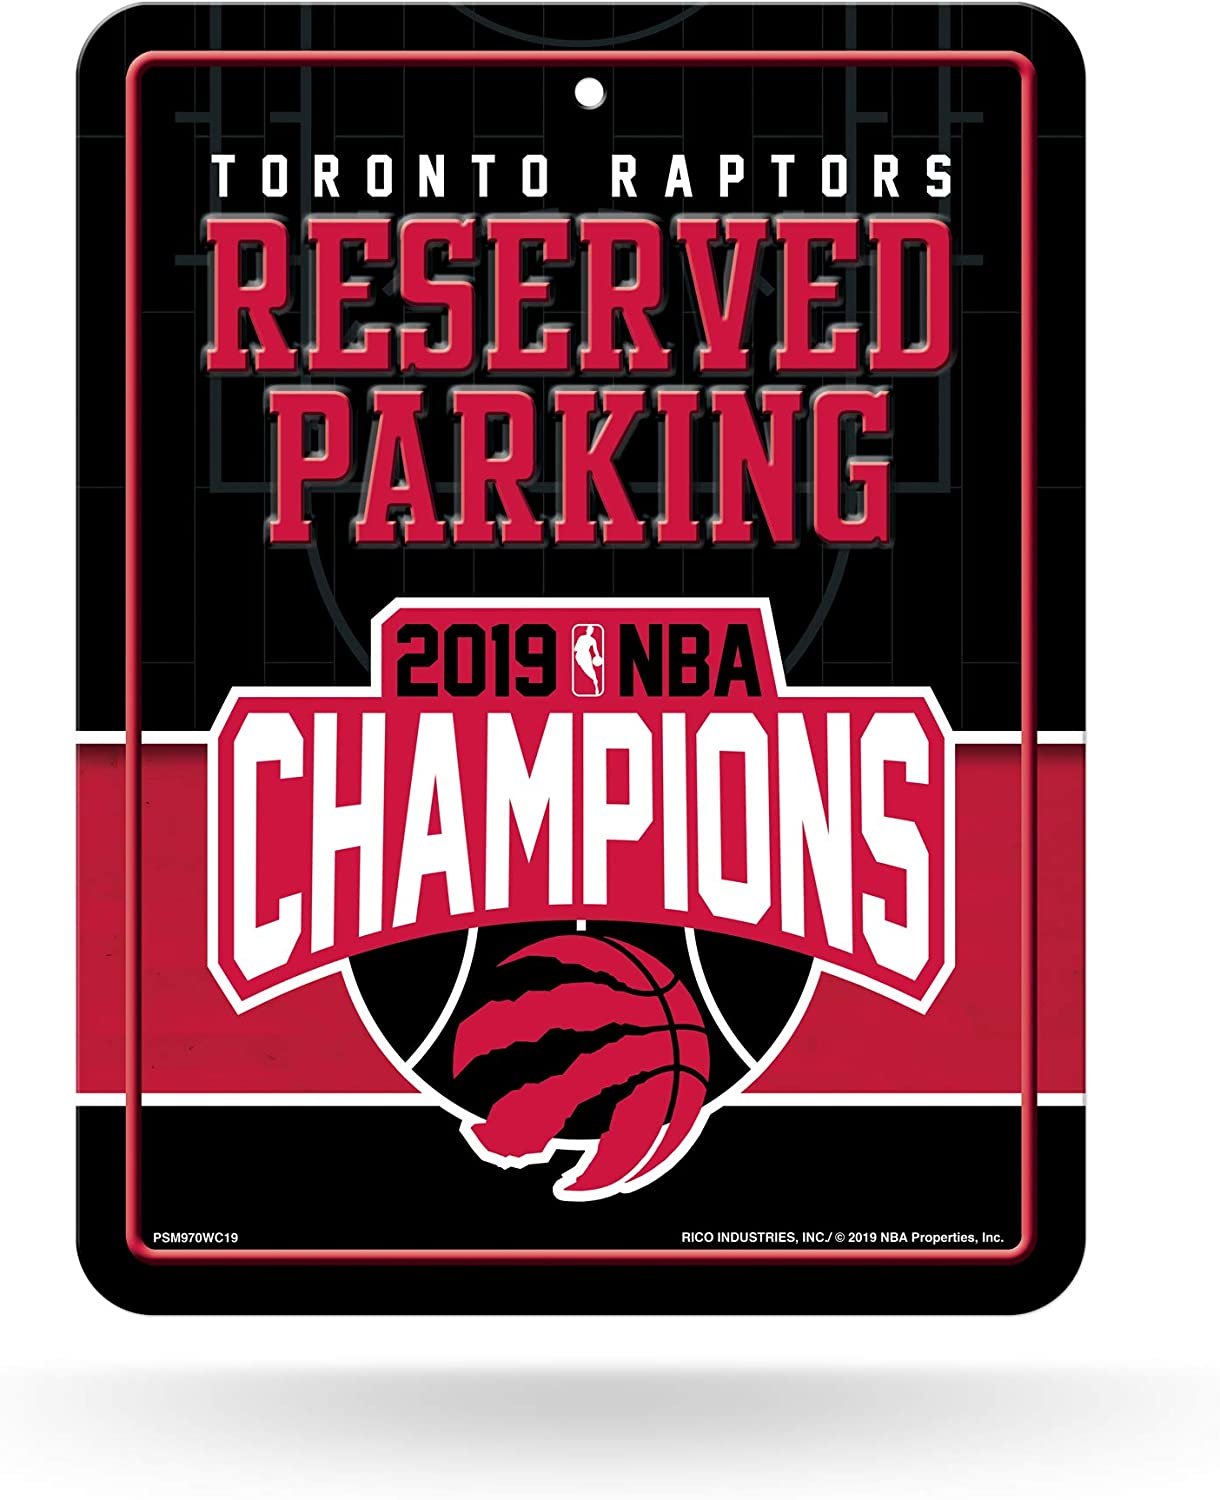 Toronto Raptors 2019 Basketball Champions 8-Inch by 11-Inch Metal Parking Sign Décor